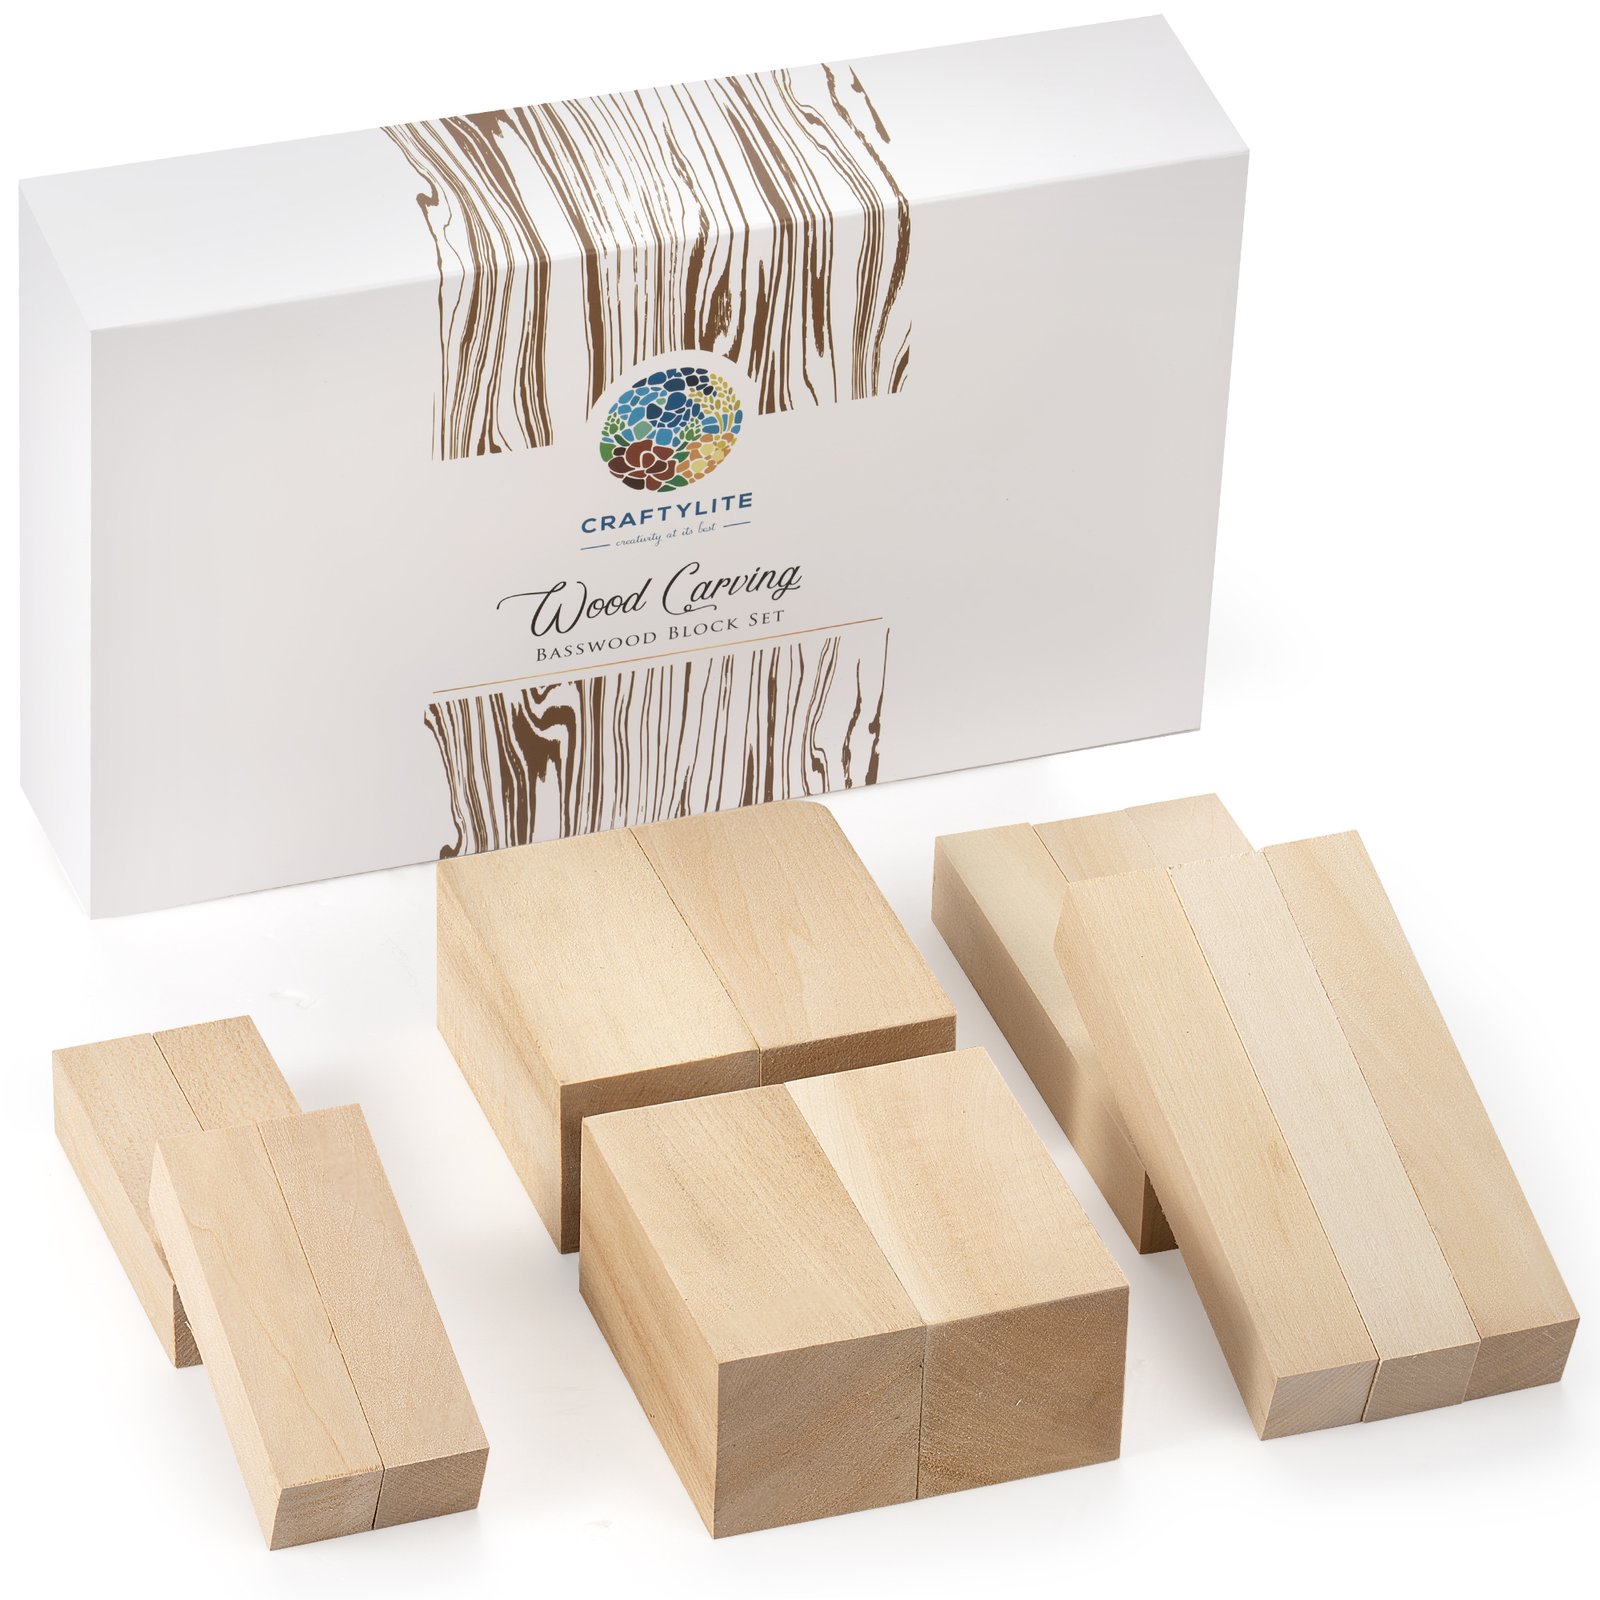 Basswood Carving Block Set of 14pcs - Craftylite - Creativity at its best